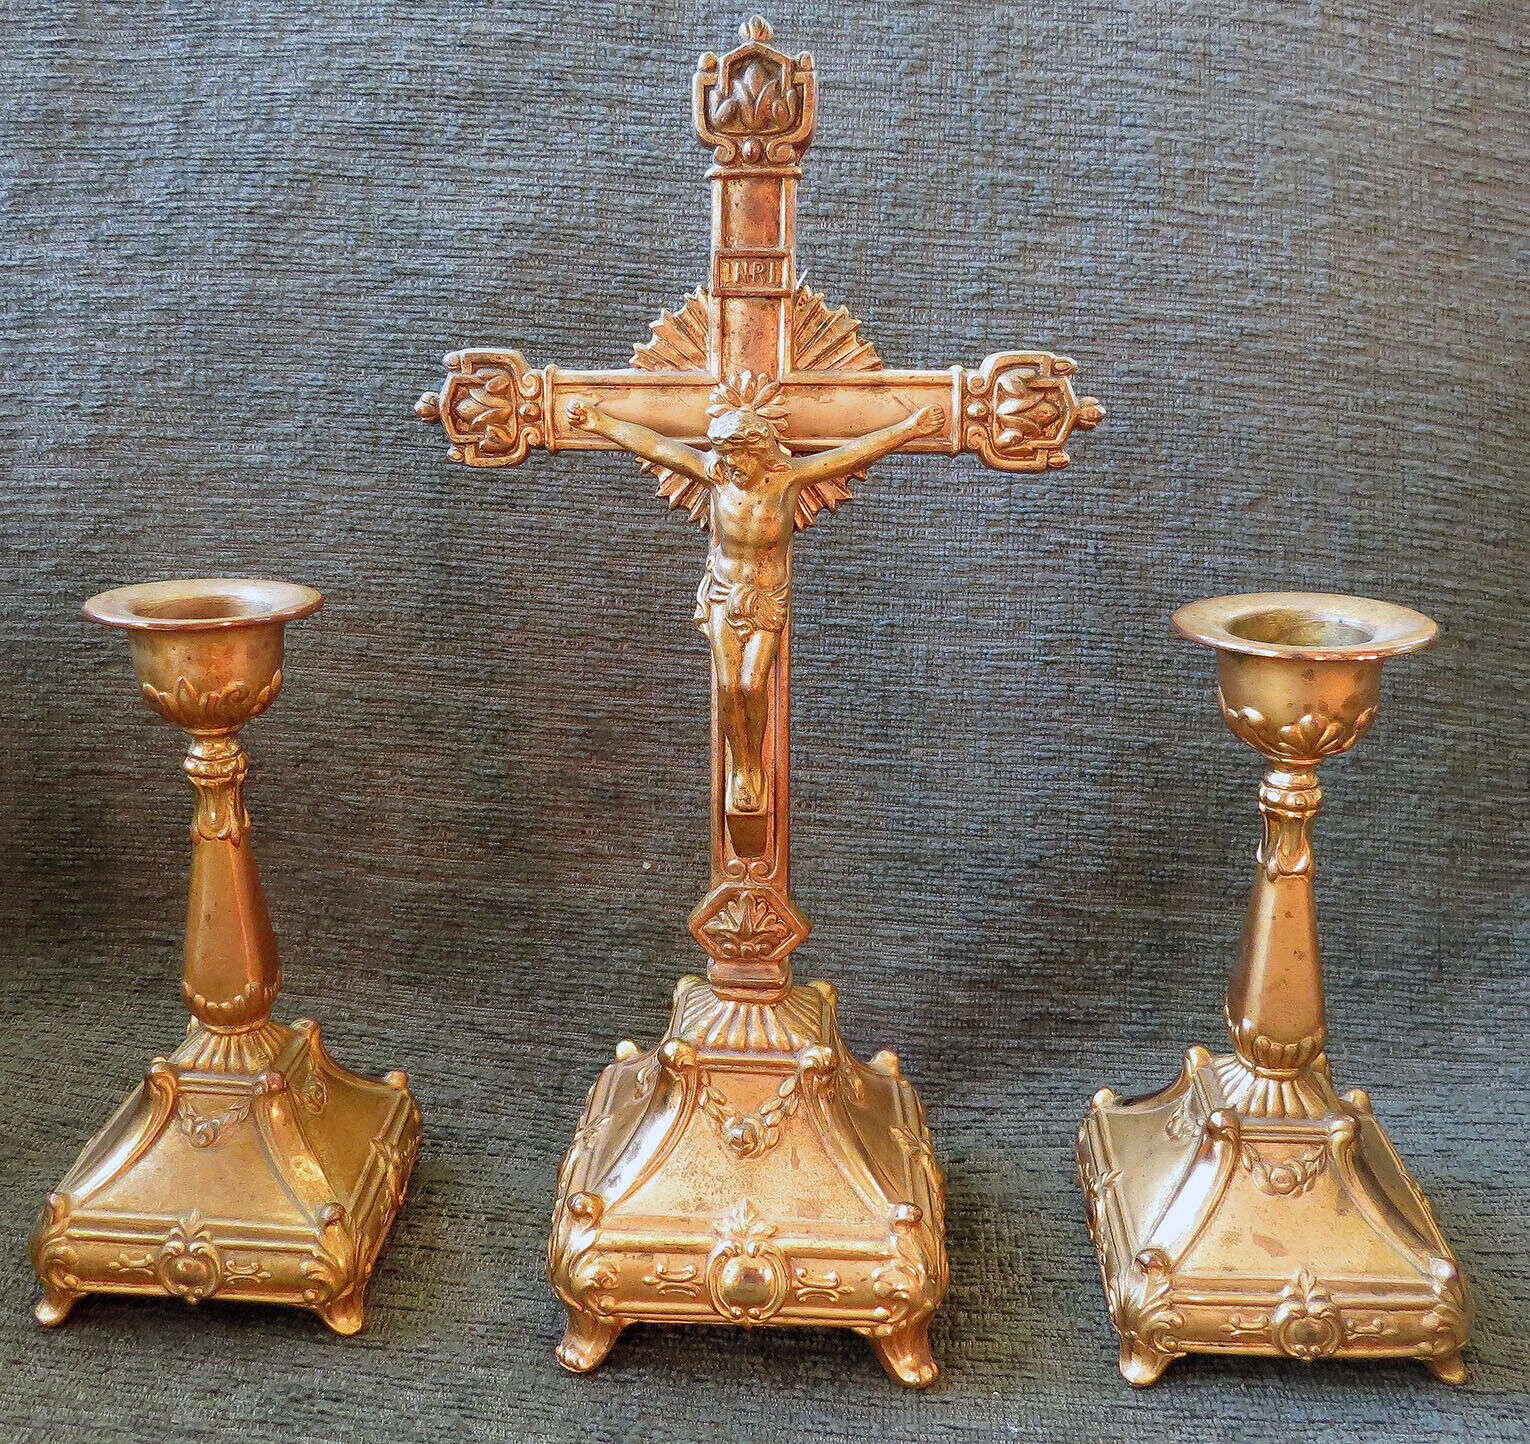  Vintage Rare Cast Metal Crucifix with matching Candle holders Gold Gilt 1921